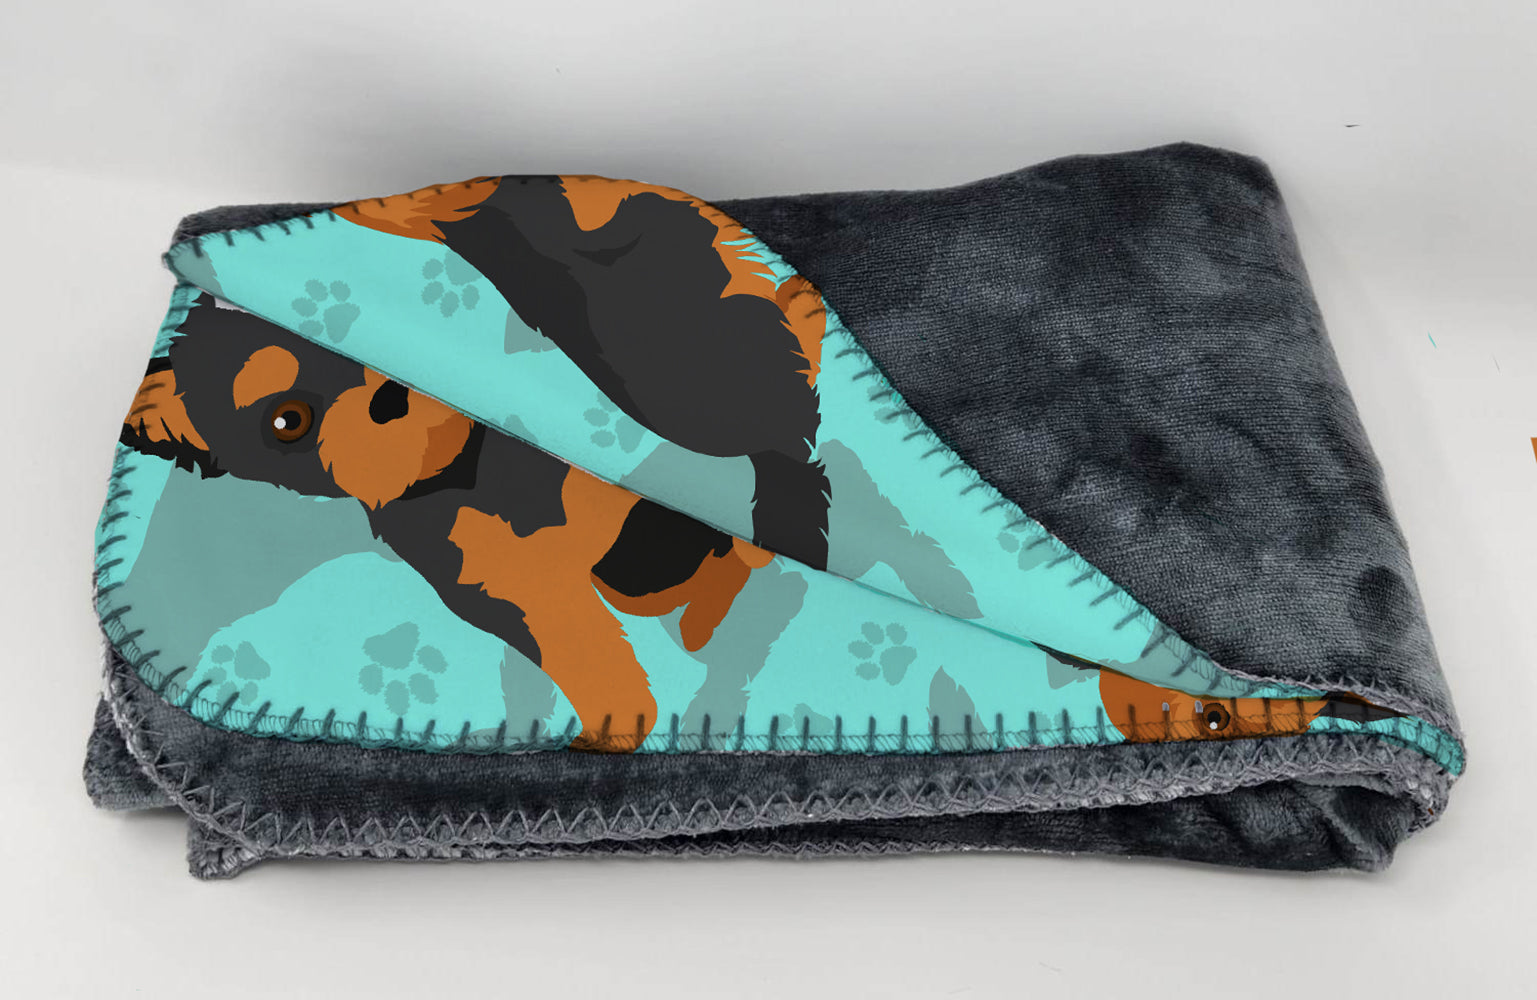 Buy this Black and Tan Yorkie Soft Travel Blanket with Bag